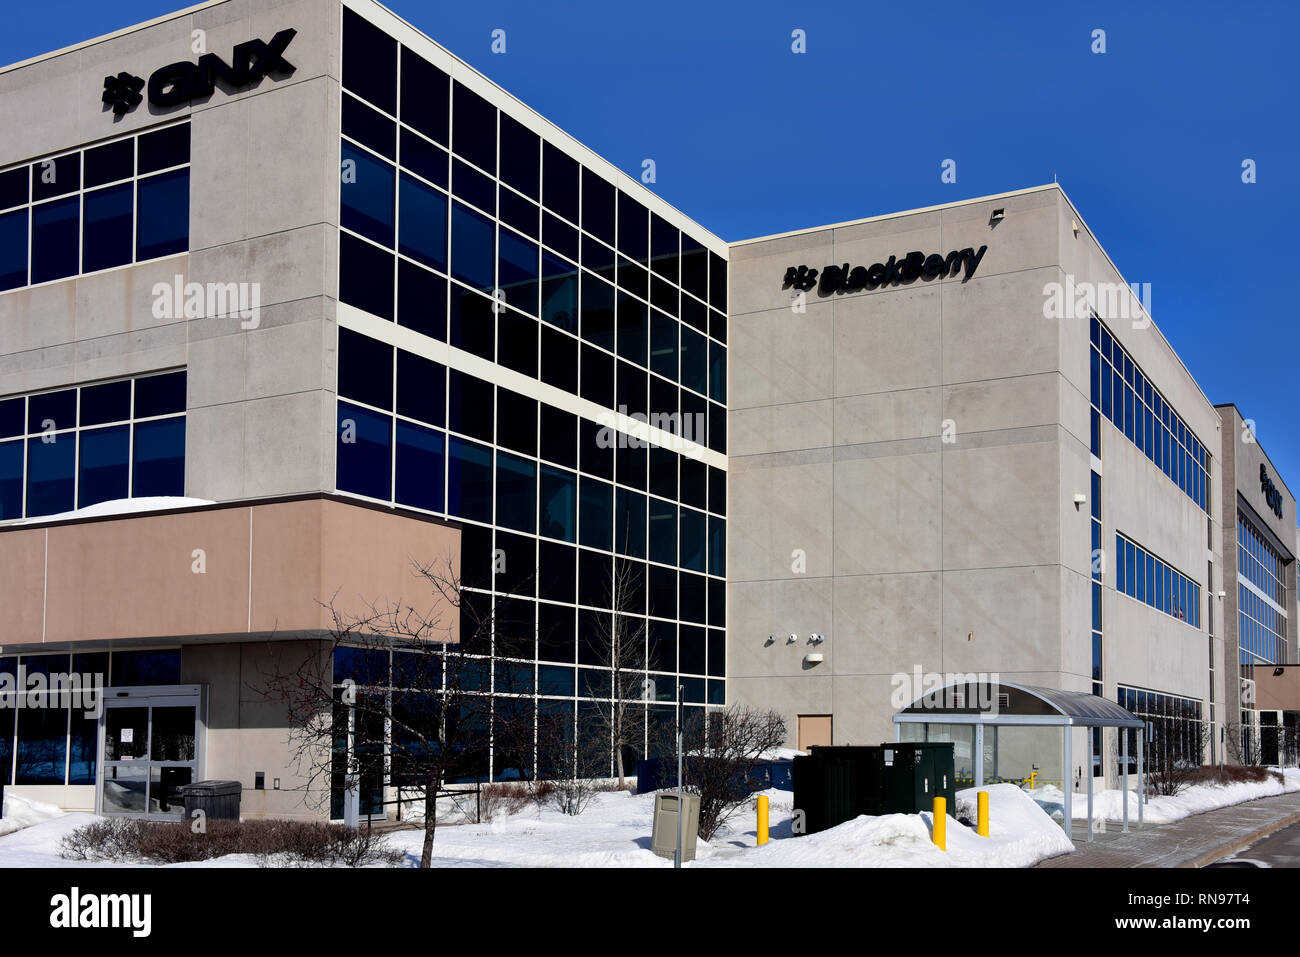 Kanata, Canada - February 17, 2019: BlackBerry QNX building on Farrar Rd.  QNX is a Canadian company acquired by BlackBerry in 2010.  Their software i Stock Photo